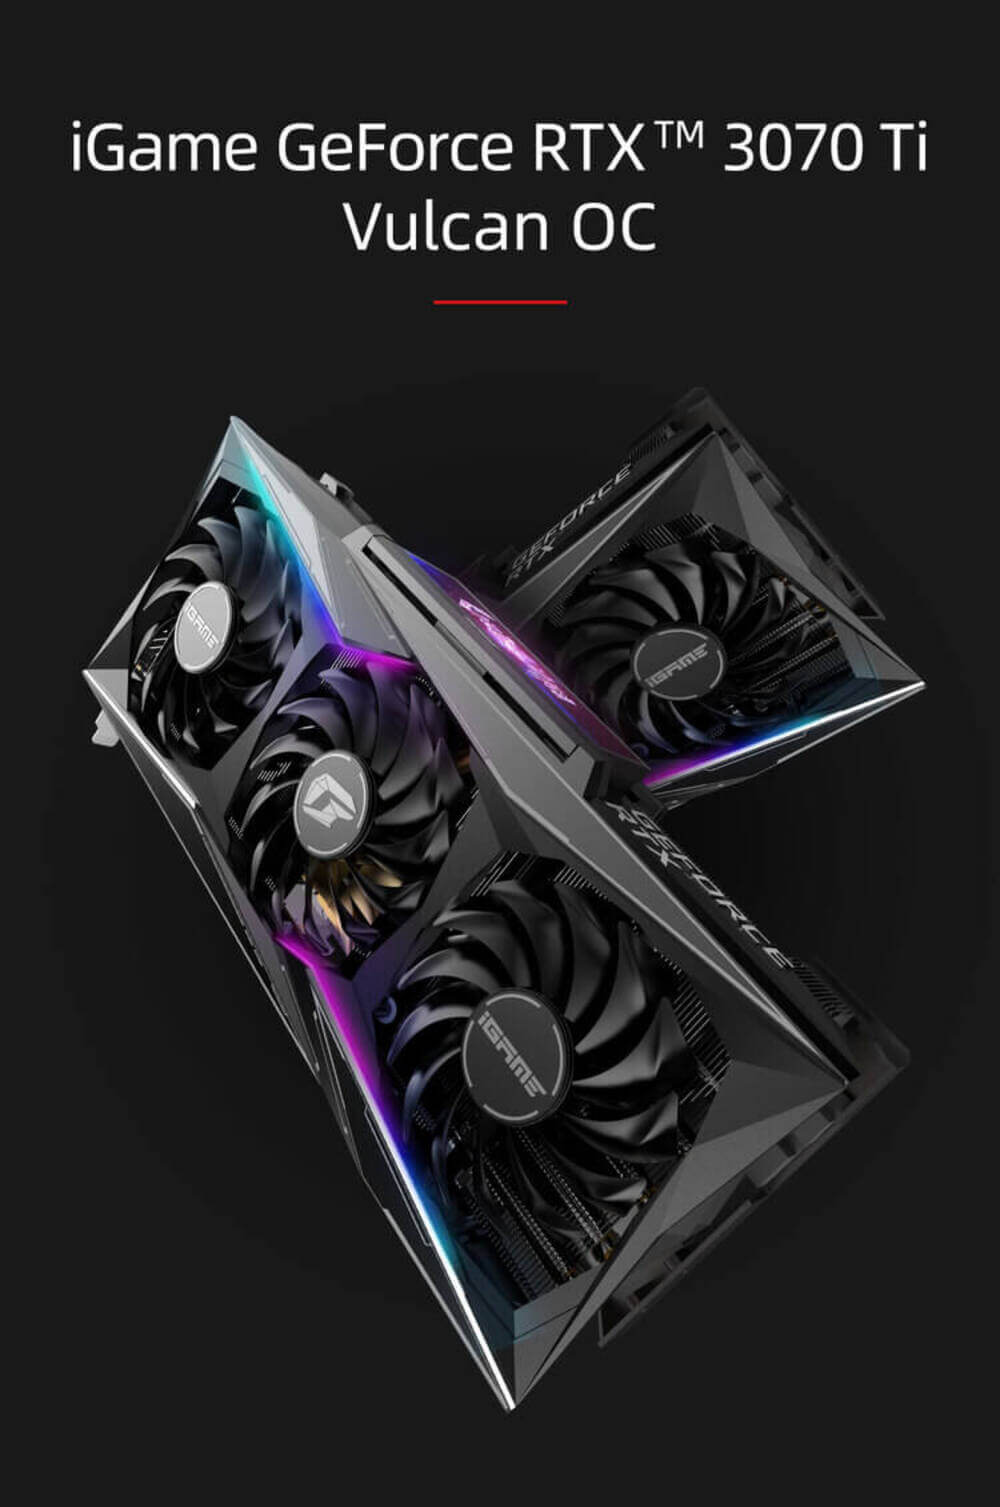 VGA Colorful iGame GEFORCE RTX 3070 Ti Vulcan OC 8G-V - songphuong.vn